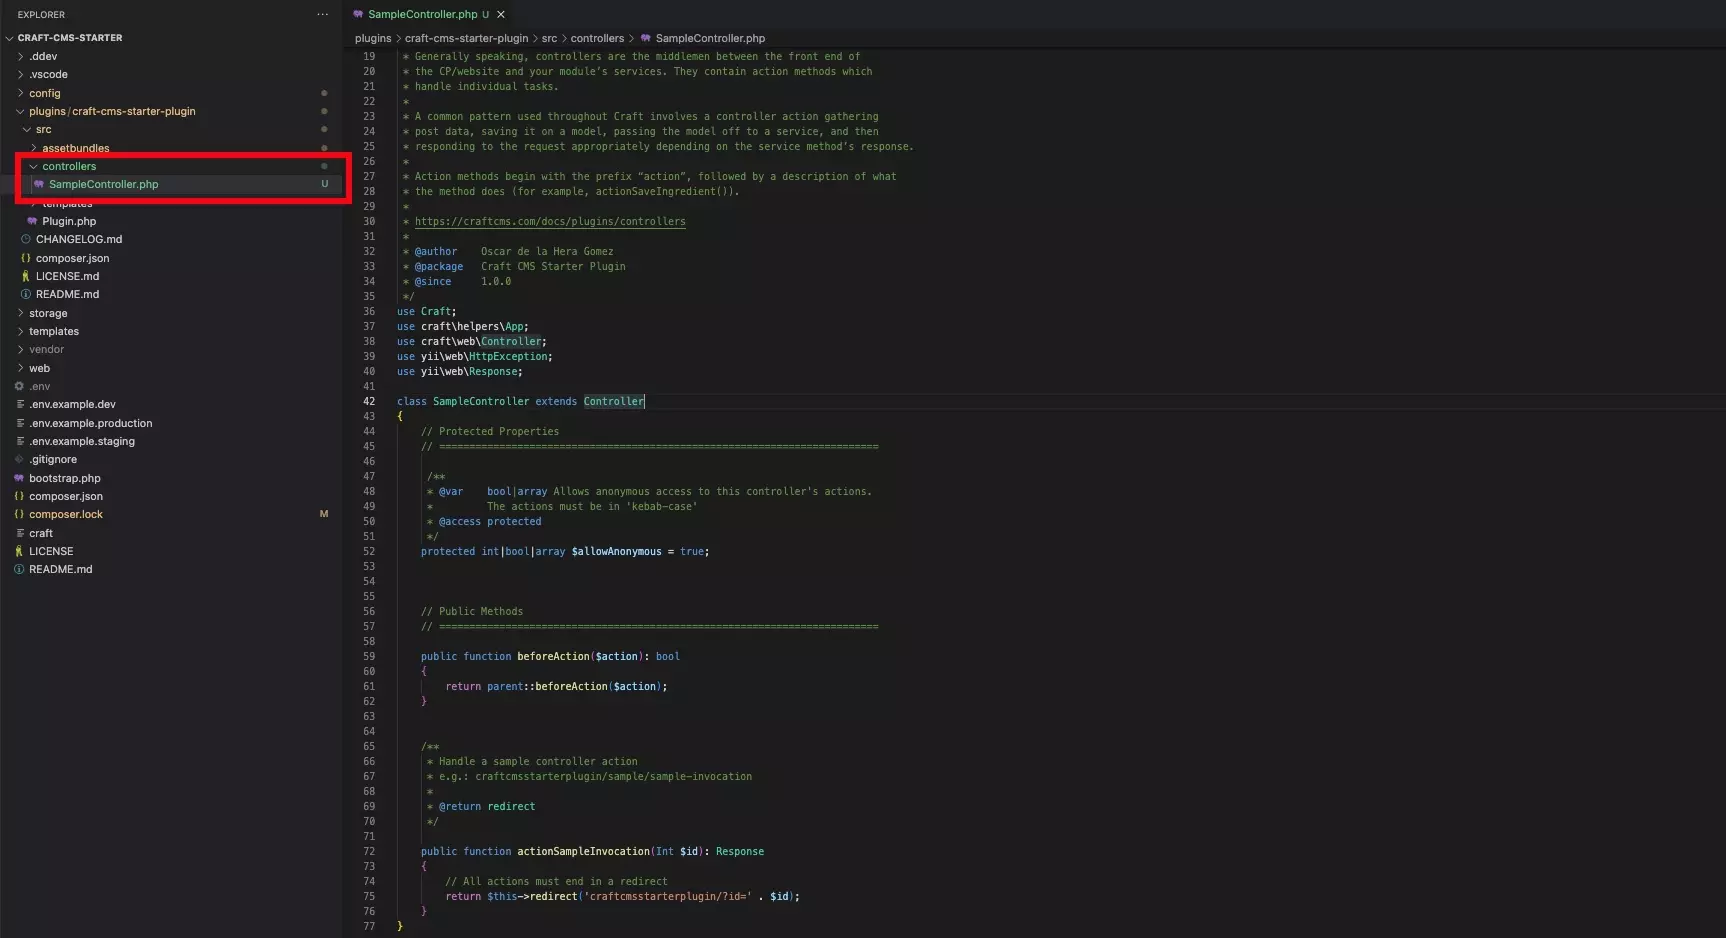 A screenshot of VSCode showing the SampleController.php that we created. The code is available below.